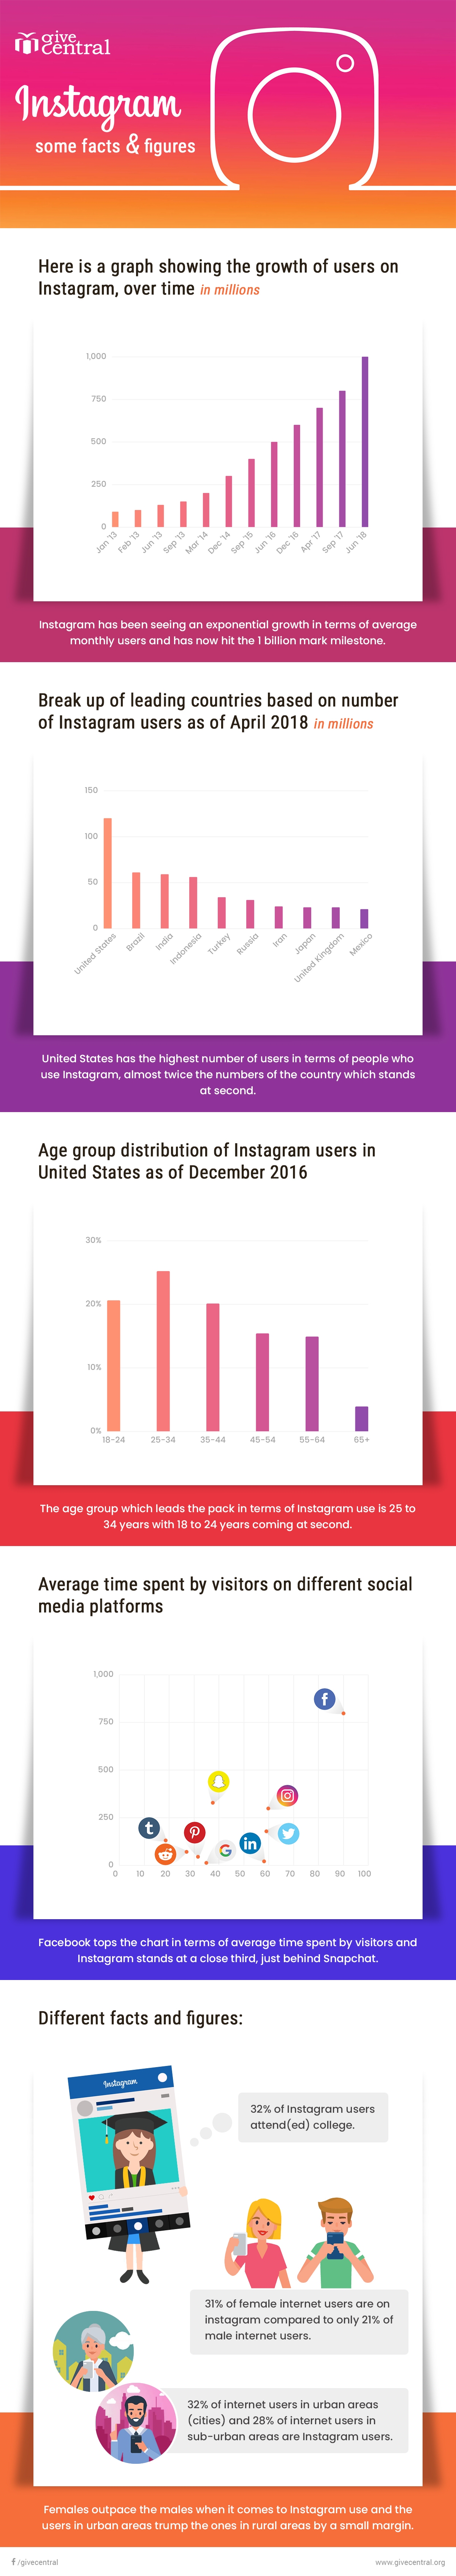  instagram facts and figures infographic - GiveCentral